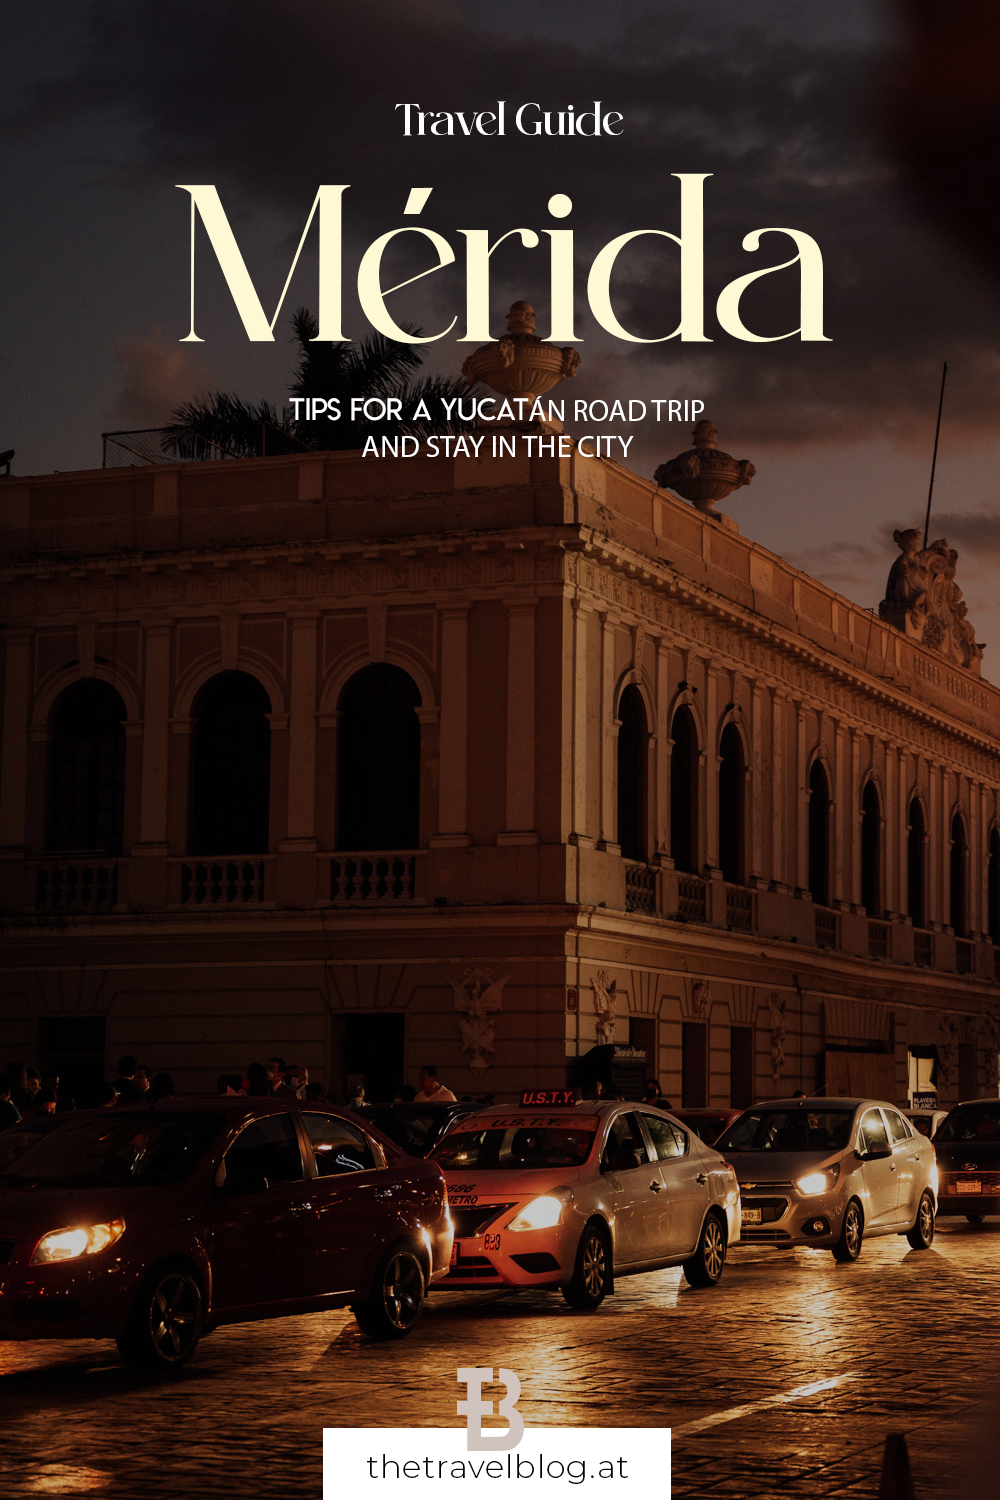 Travel Guide for Mérida - the capital of Yucatán. Including tips for day trips and detailed itineraries.